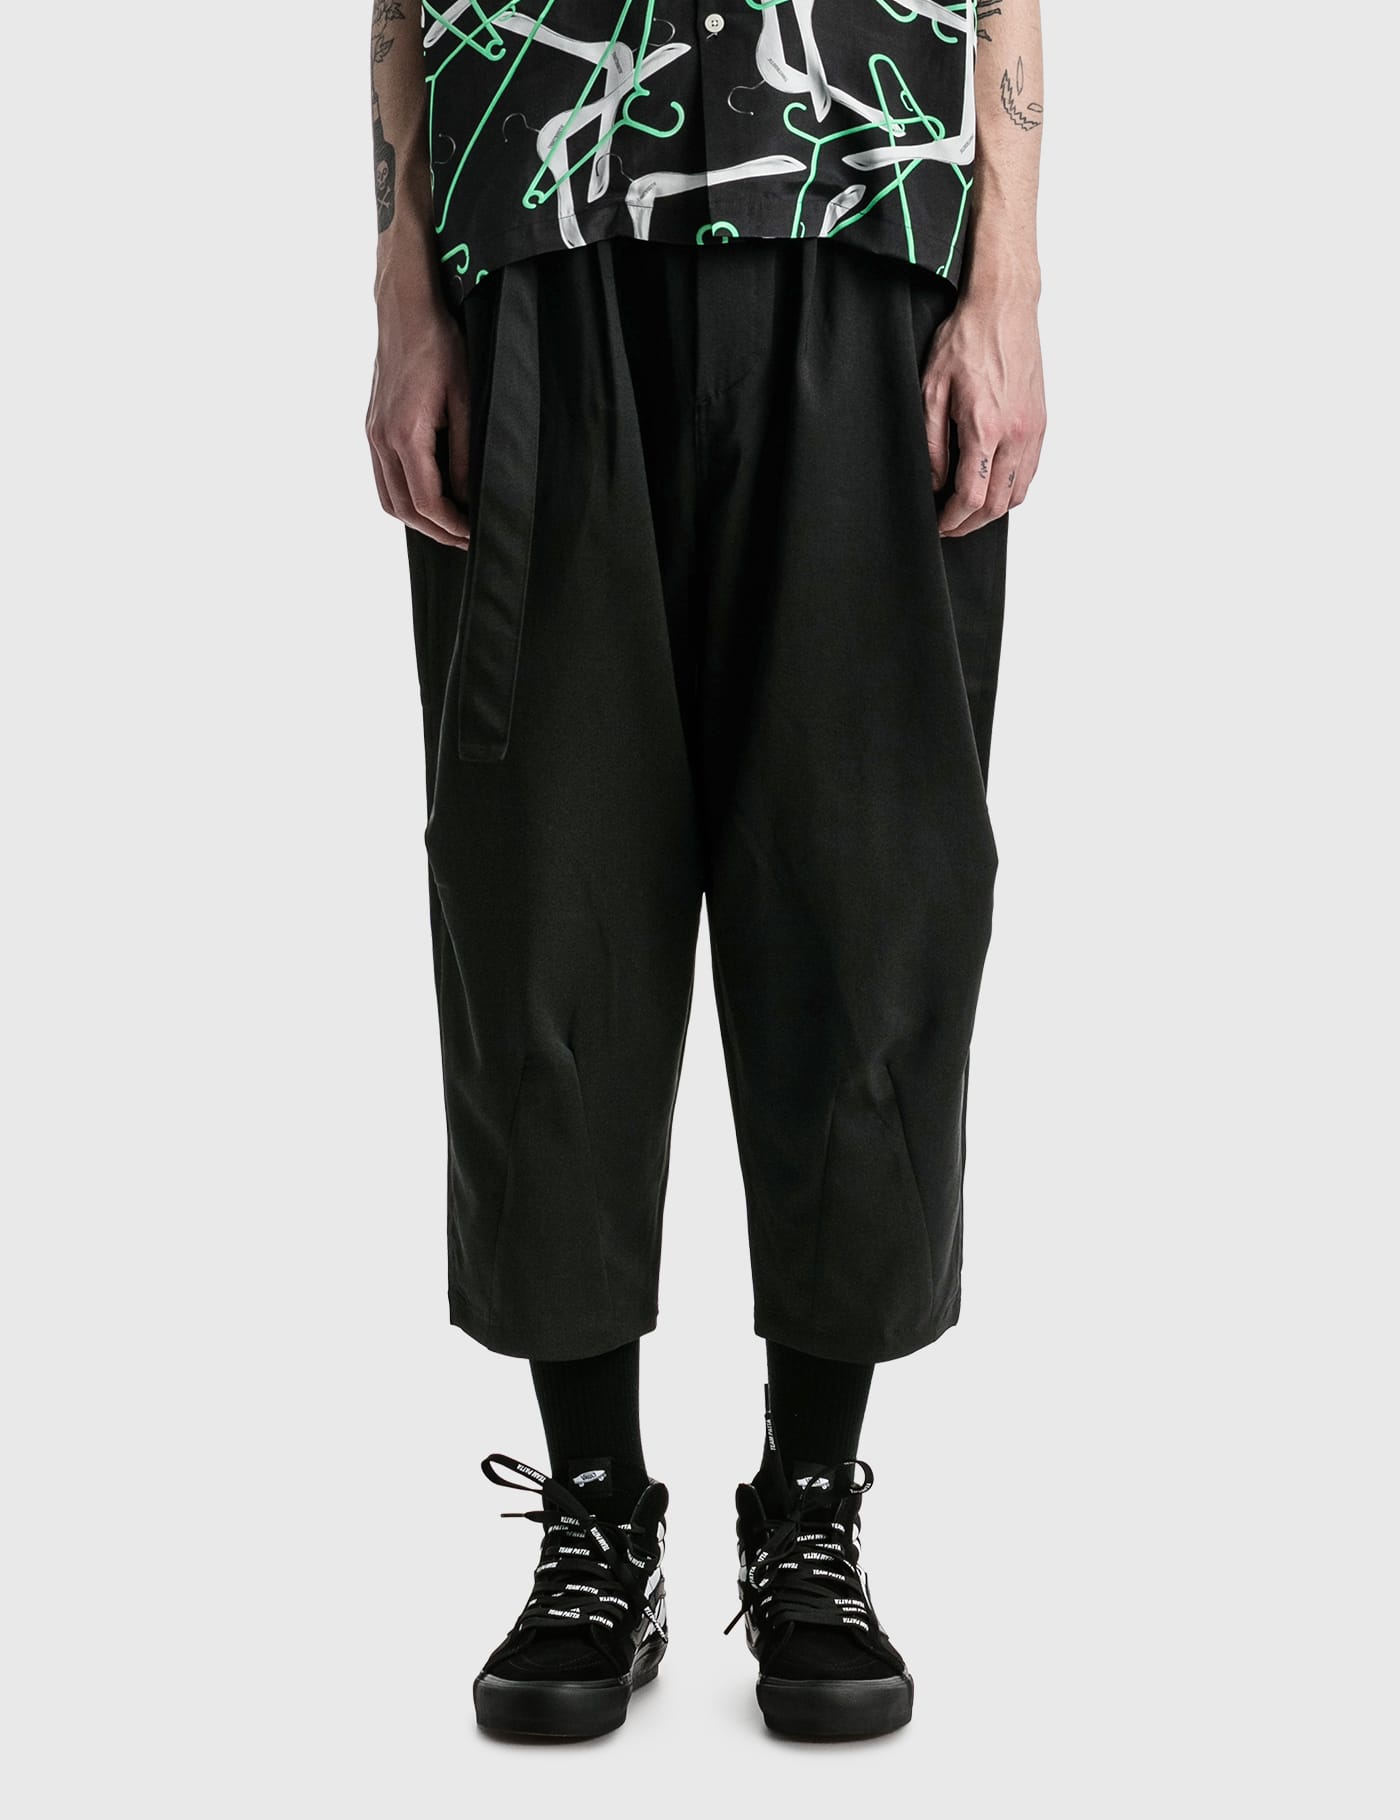 TIGHTBOOTH - Balloon Pants | HBX - Globally Curated Fashion and 